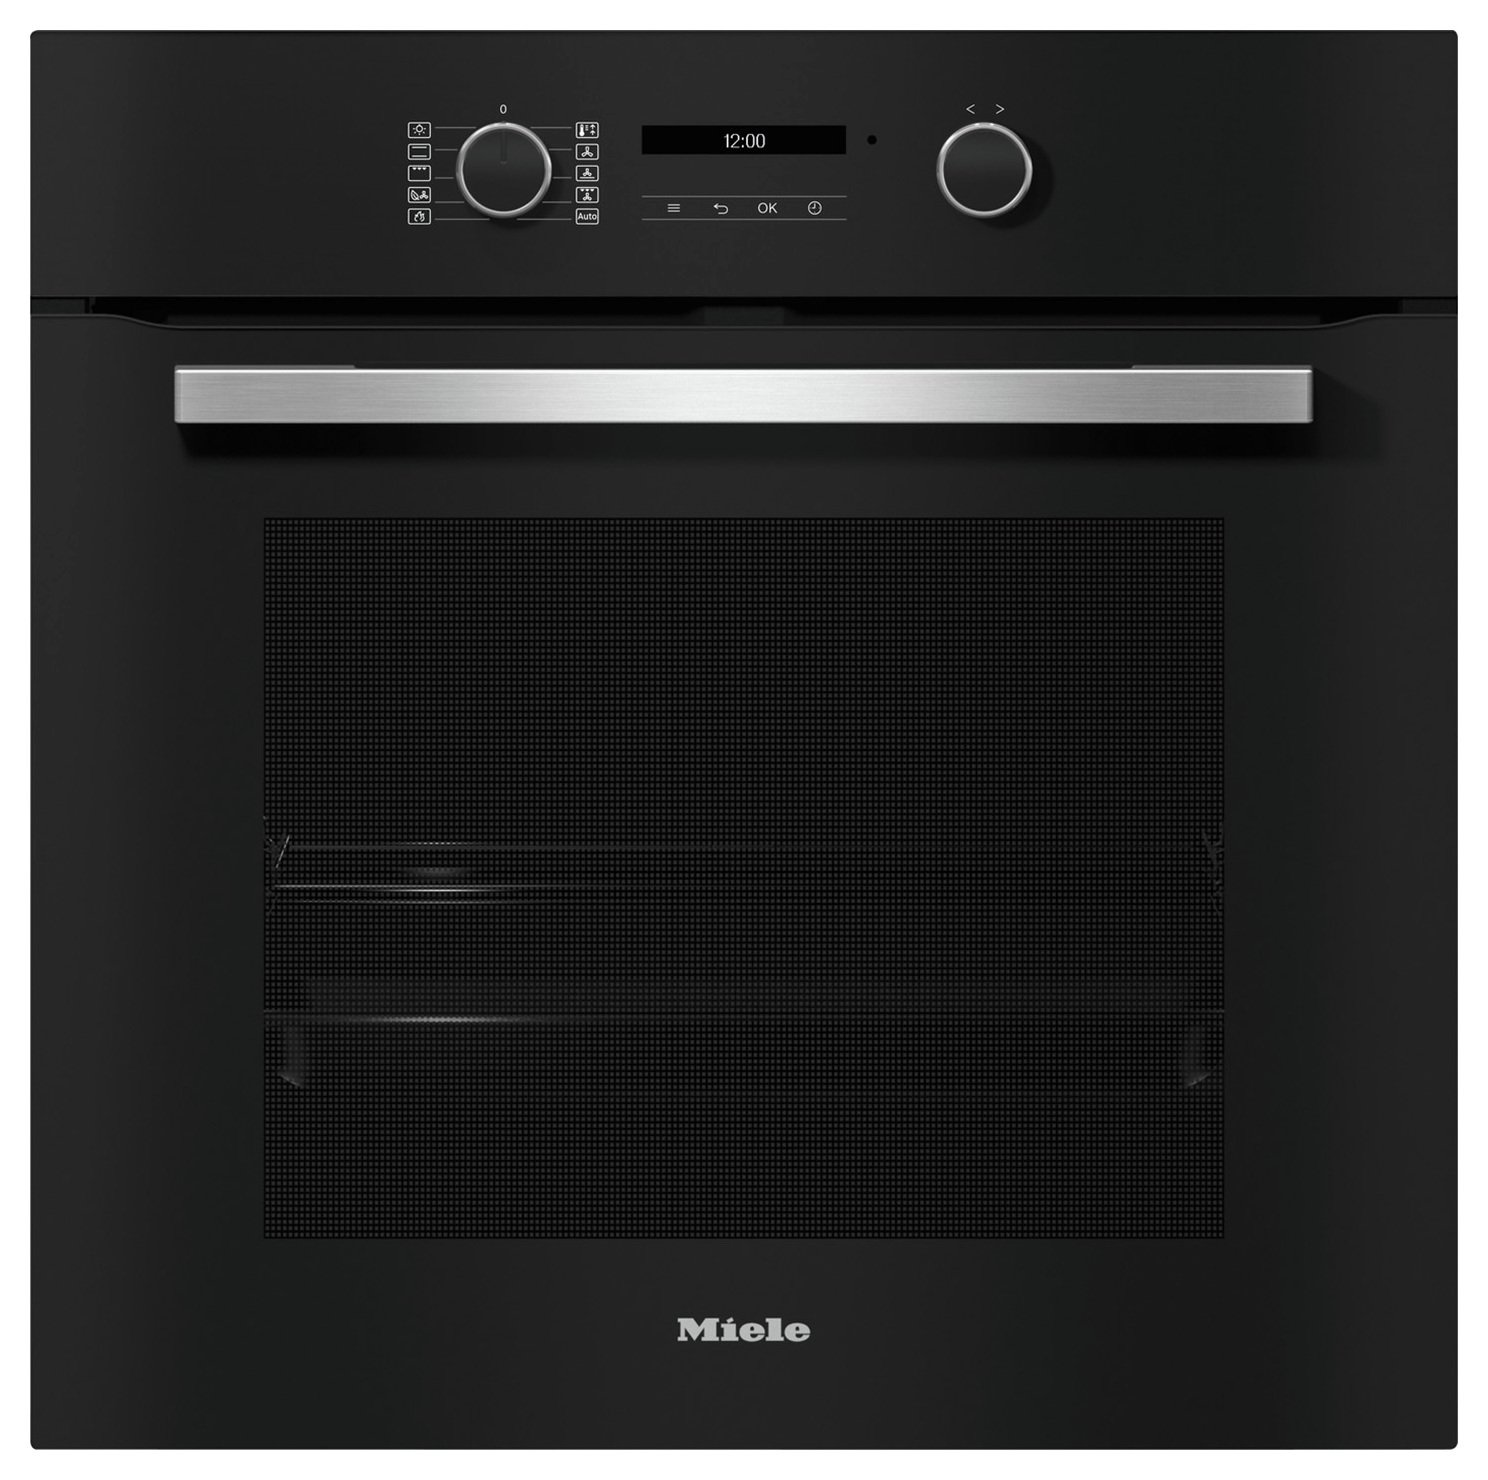 Miele H2766BP Built In Single Electric Oven - Black